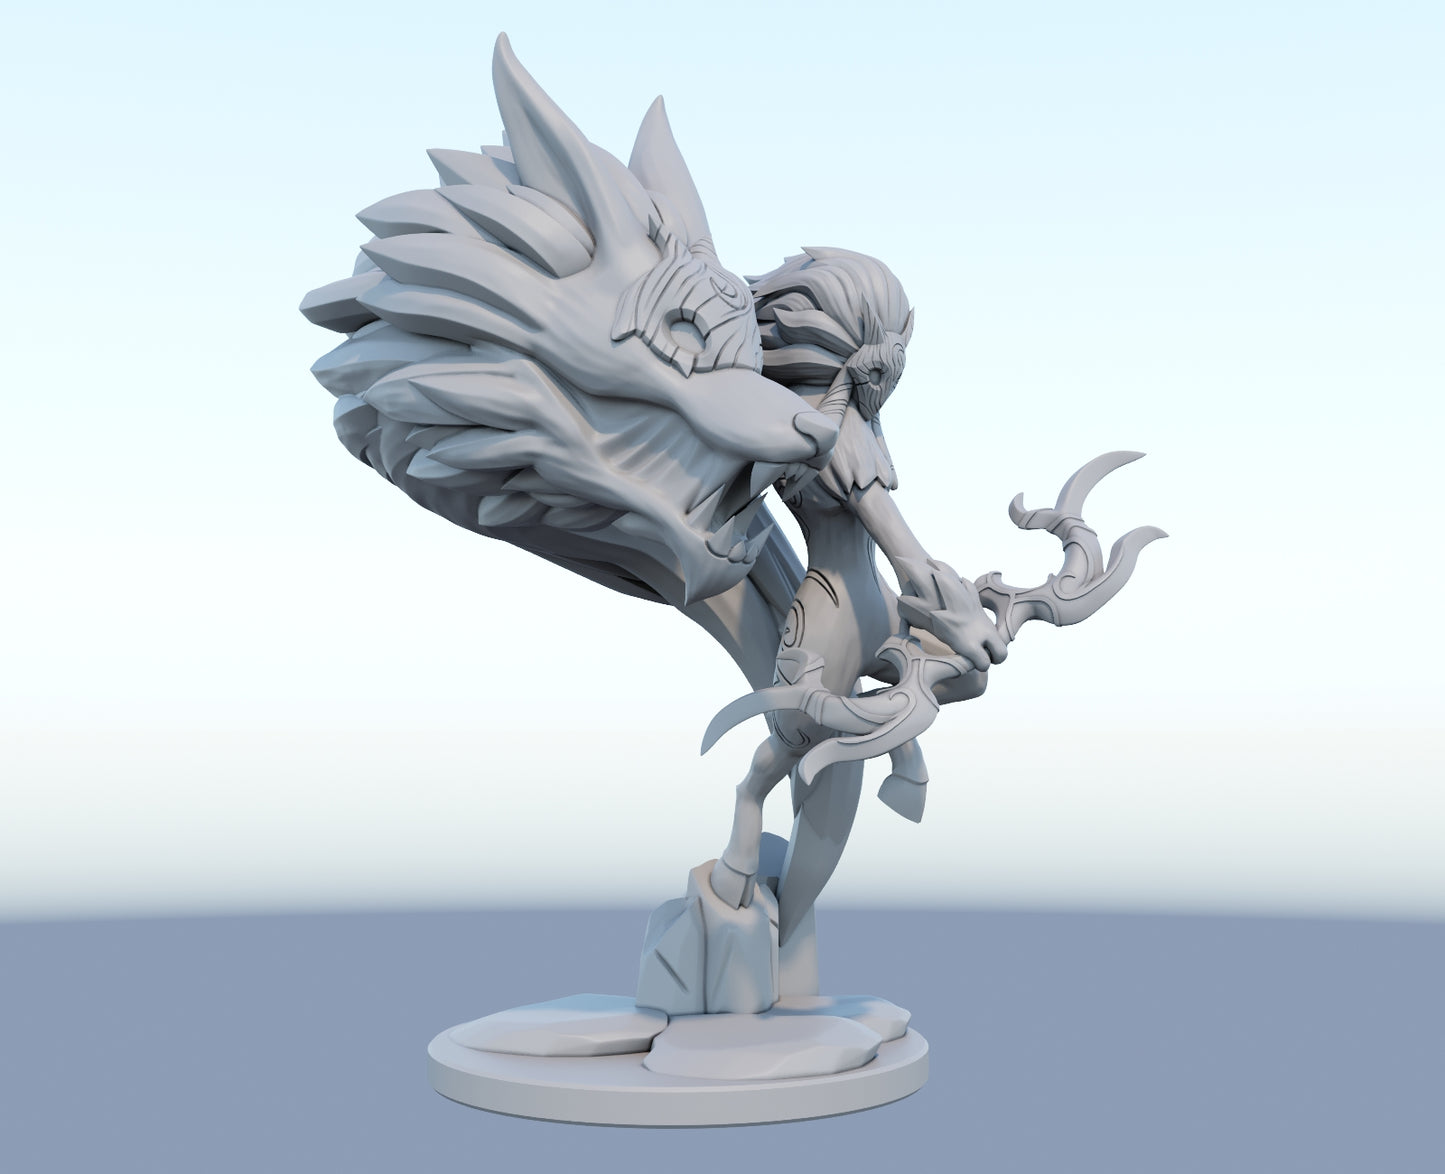 Kindred 3D-printed League of Legends champion figure. Decorate your gaming setup or home with your favorite League of Legends champion! Choose between the unpainted version, perfect for you to paint yourself, or the hand-painted version by a professional painter. Order your figure today!